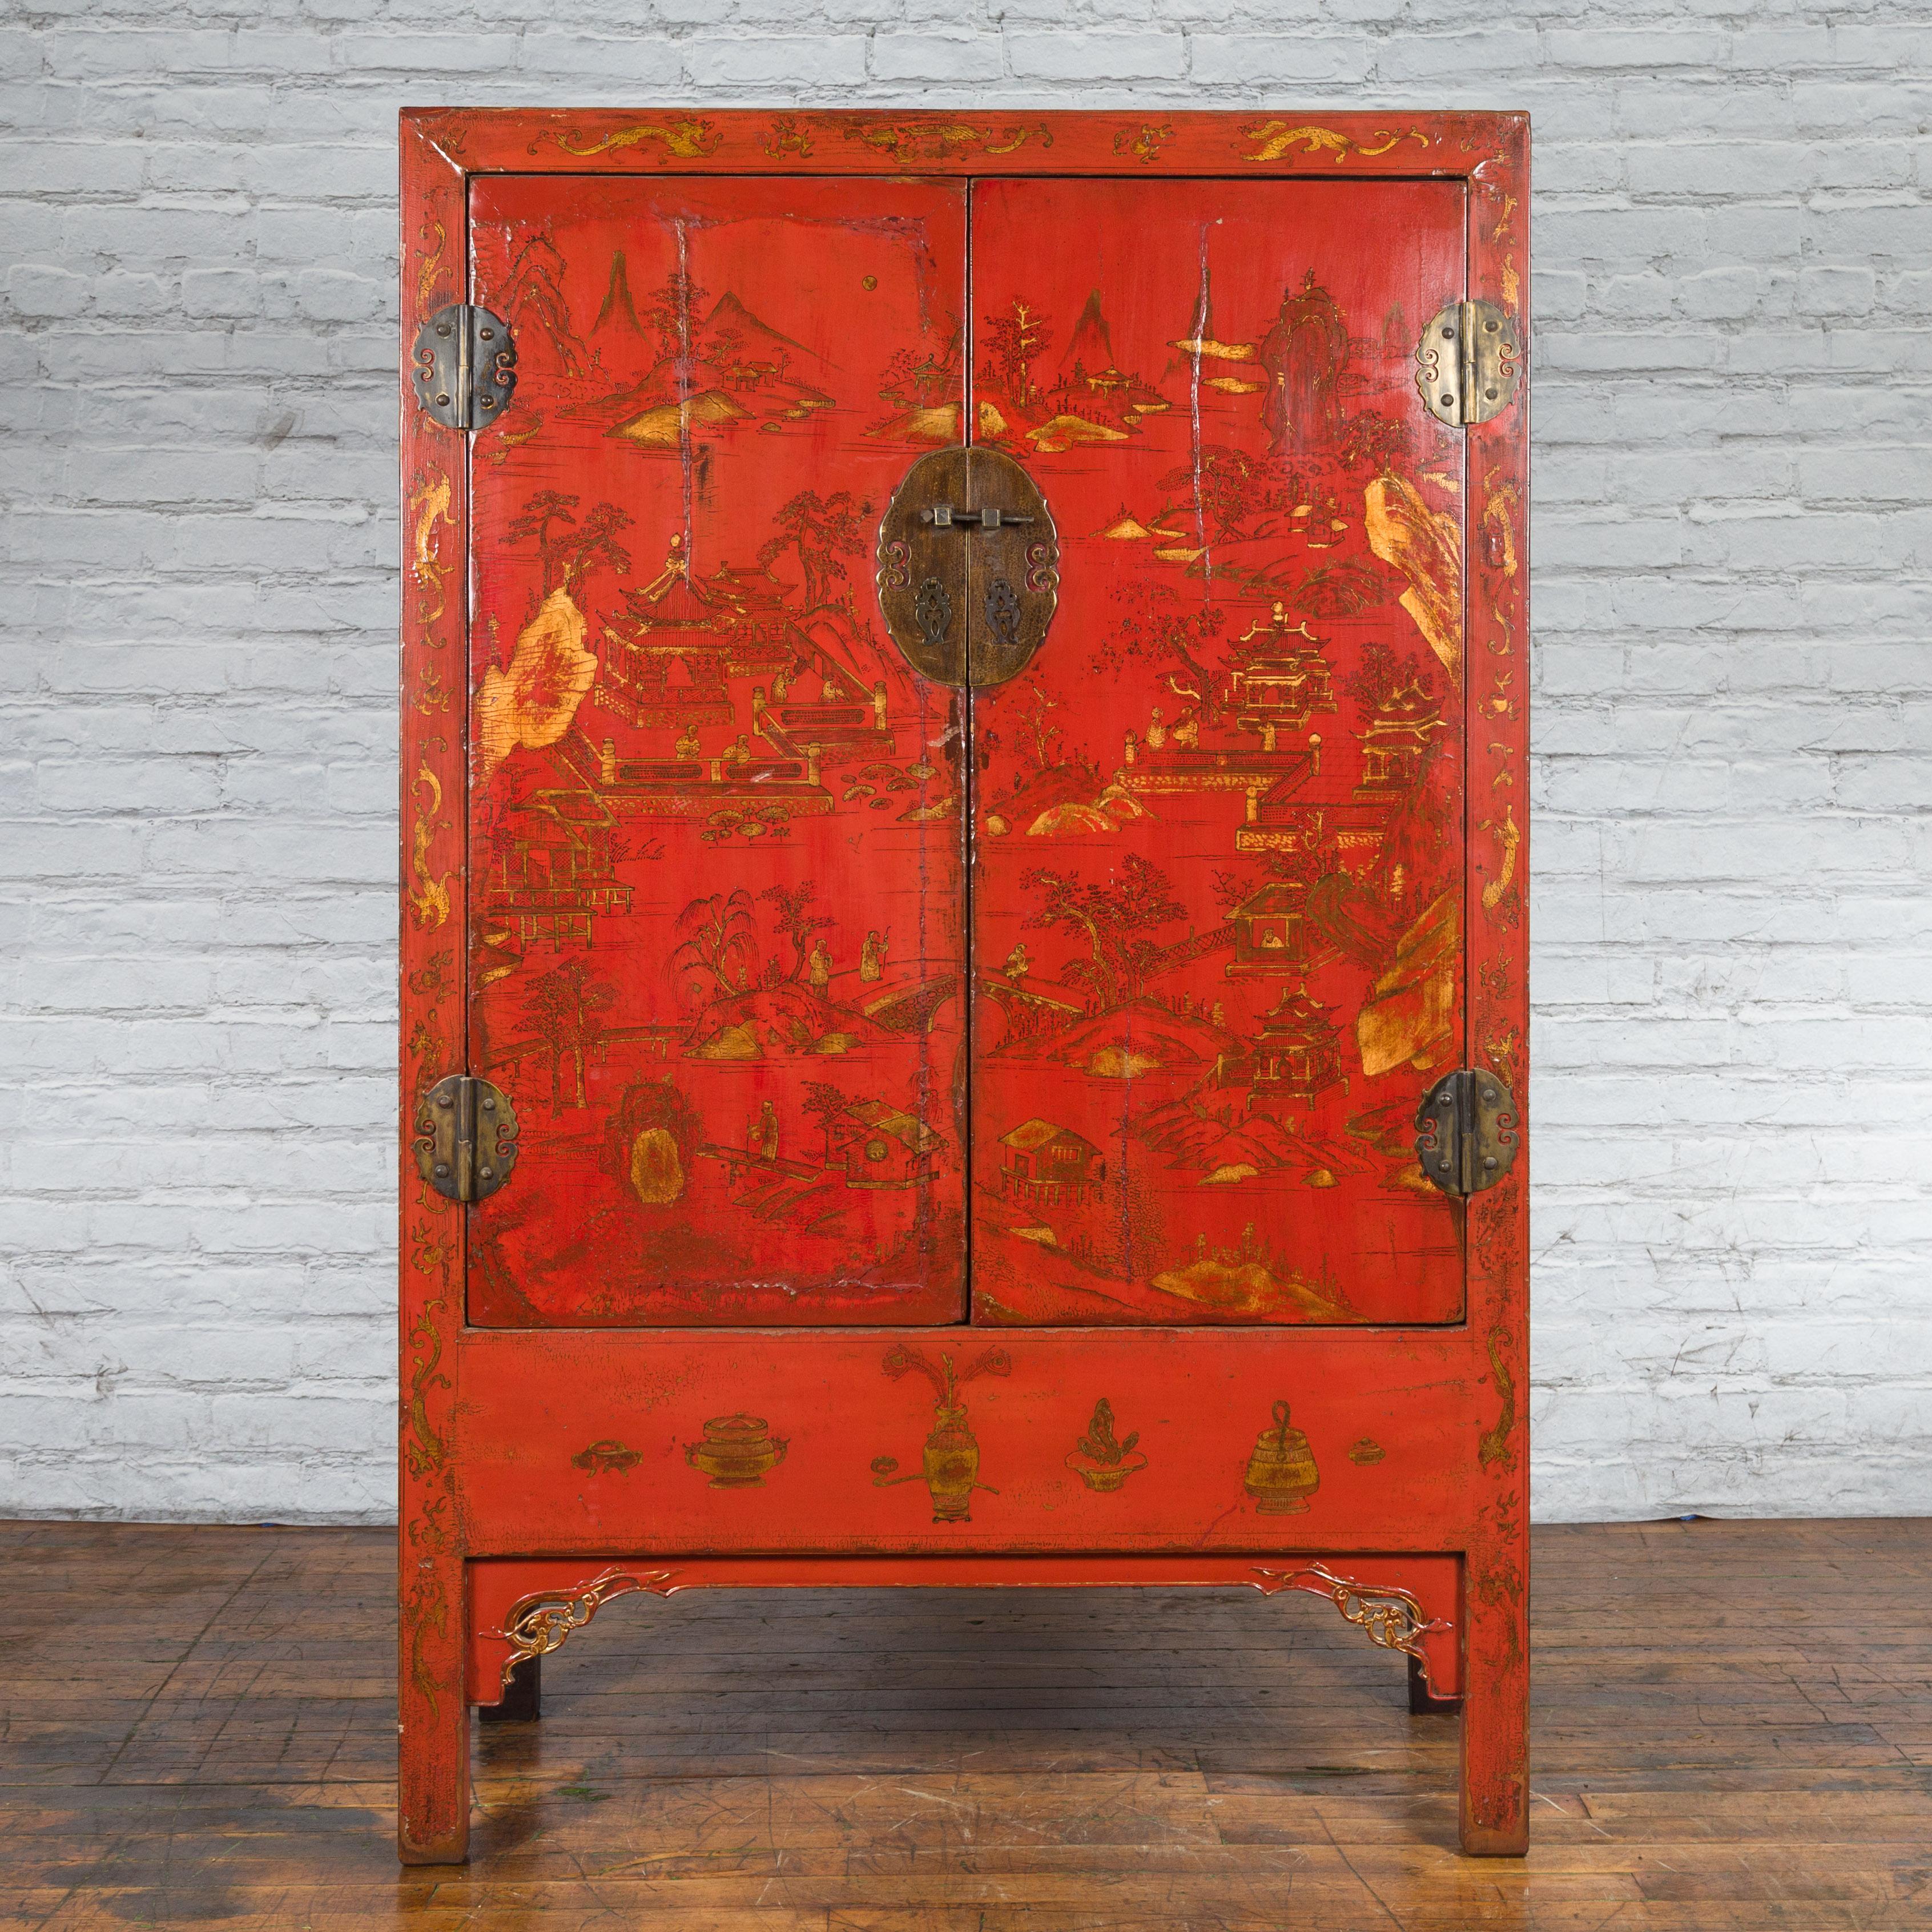 A Chinese Qing Dynasty period cabinet from the 19th century with original red lacquer and gilt hand-painted court scenes décor. Created in China during the Qing Dynasty in the 19th century, this cabinet features its original red lacquer serving as a